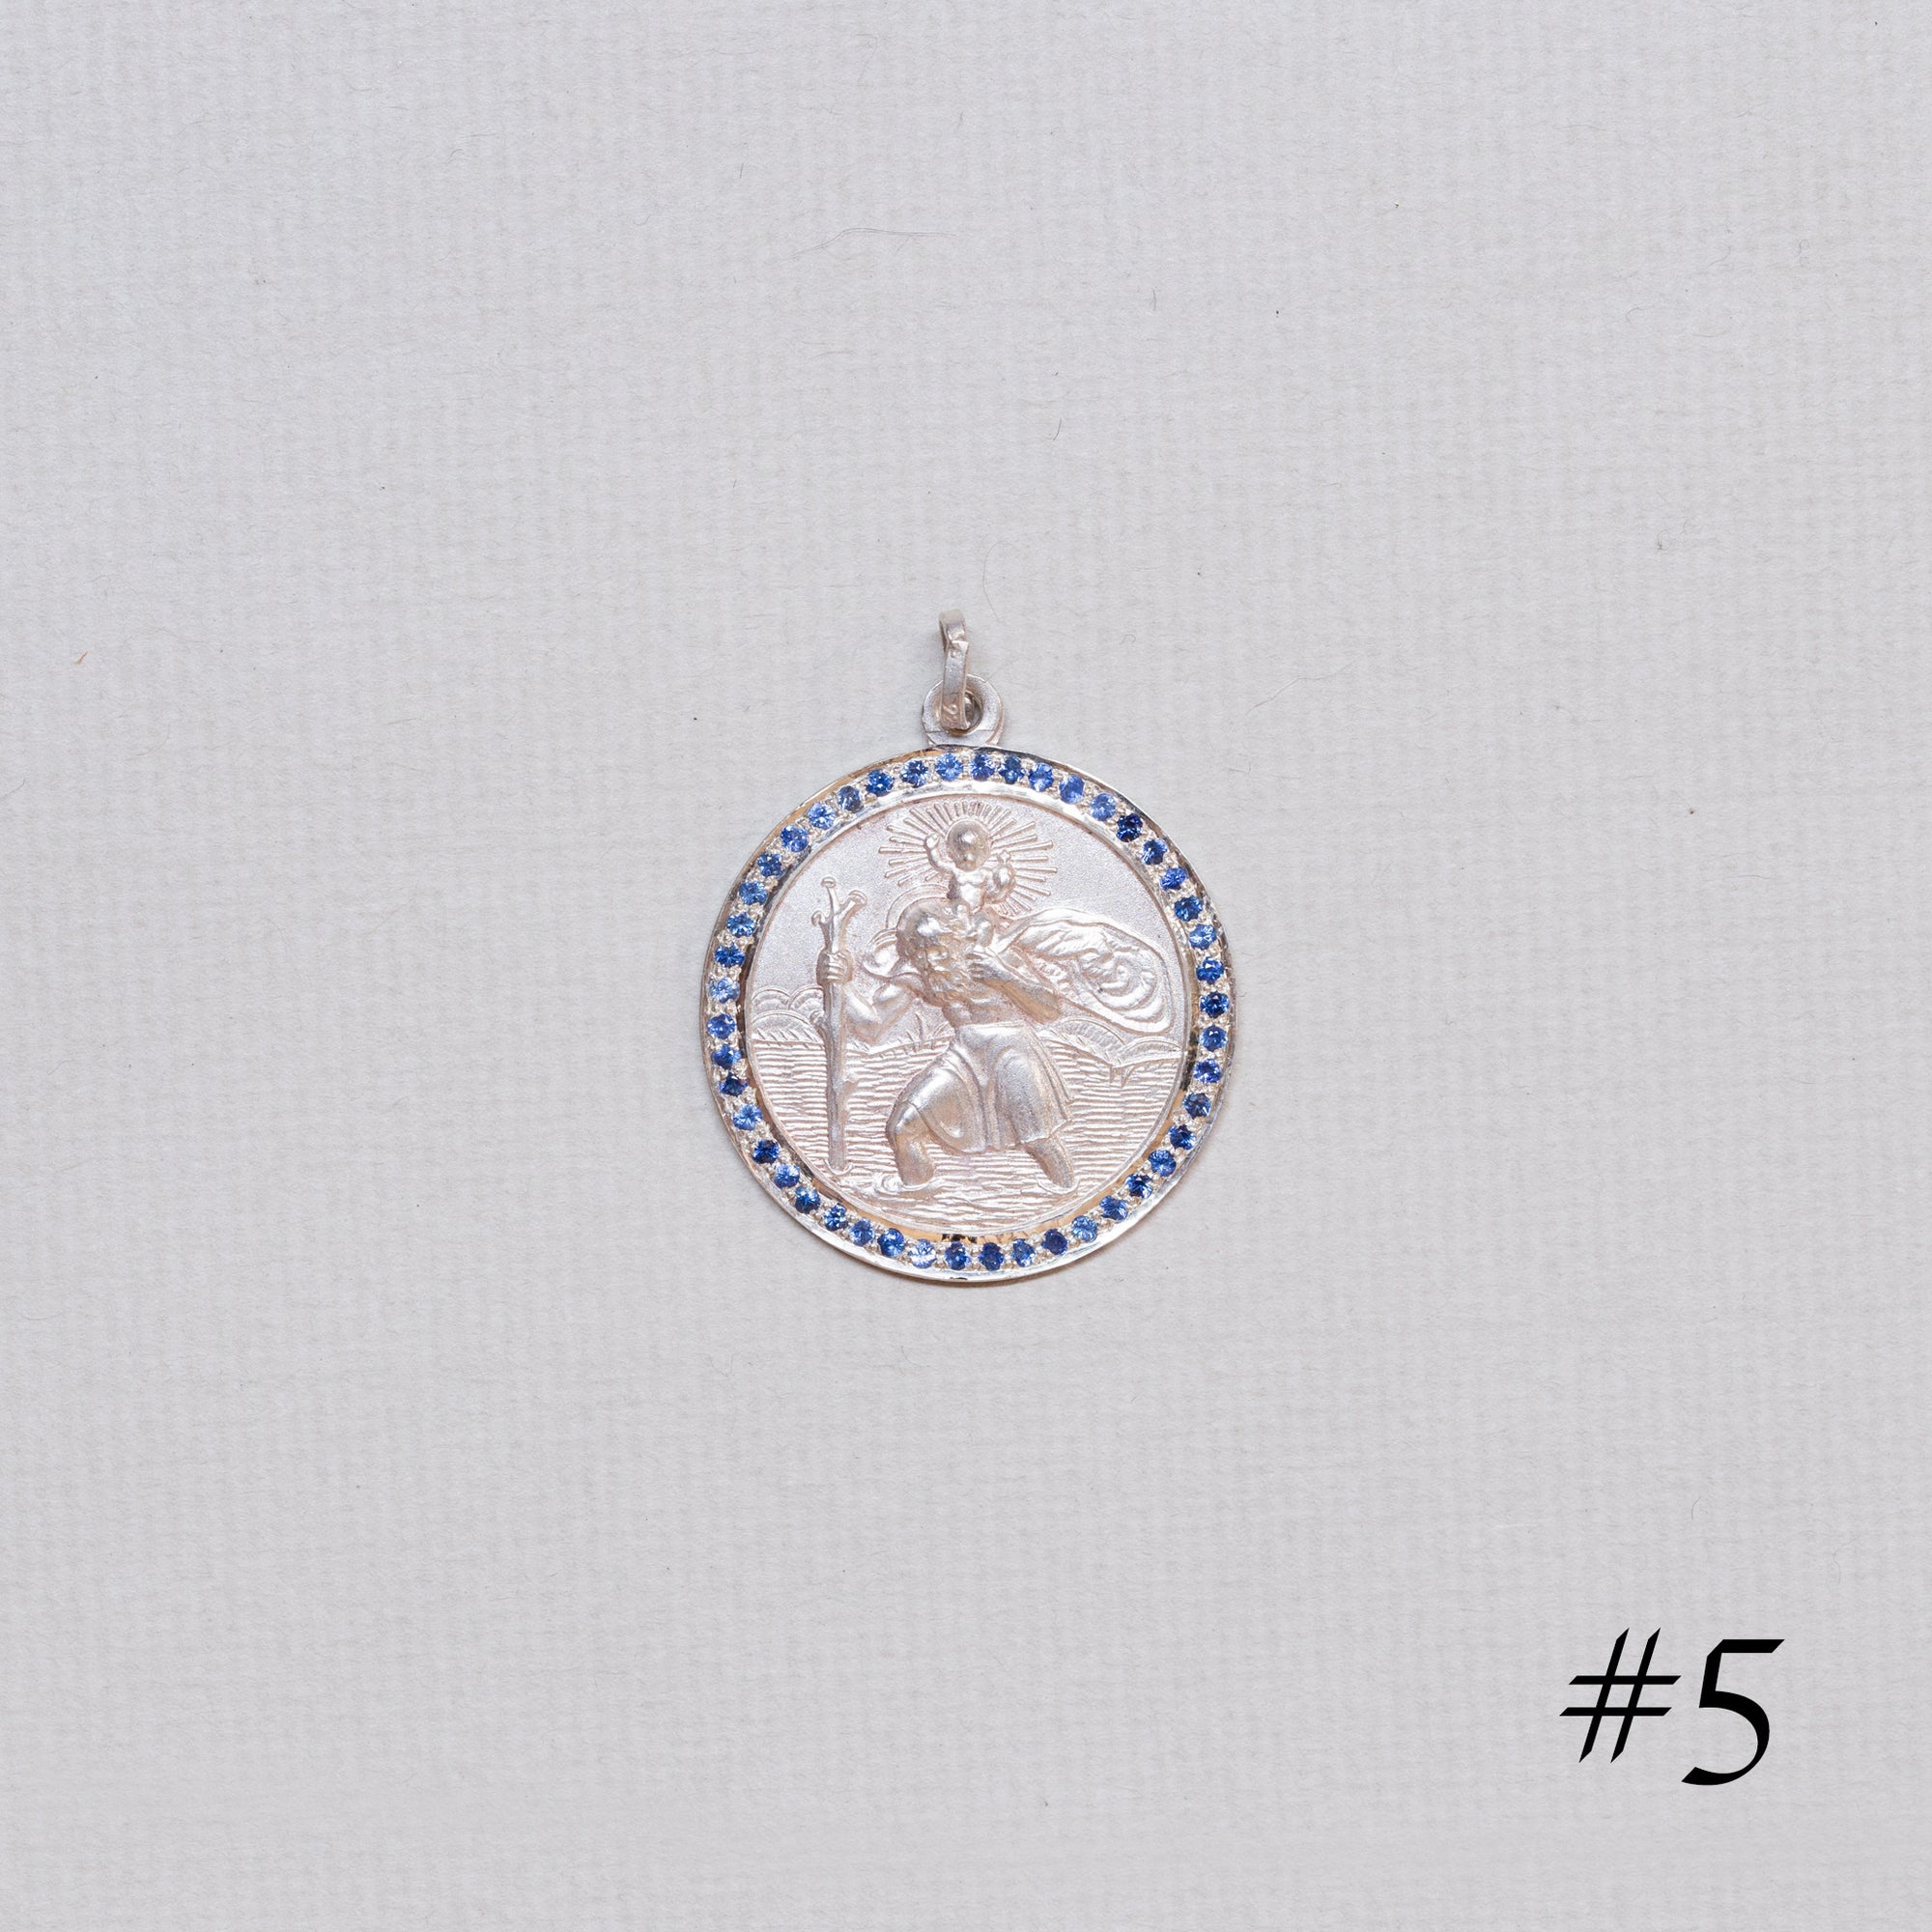 Vintage Silver St. Christopher Charm Pendant with Sapphires #5